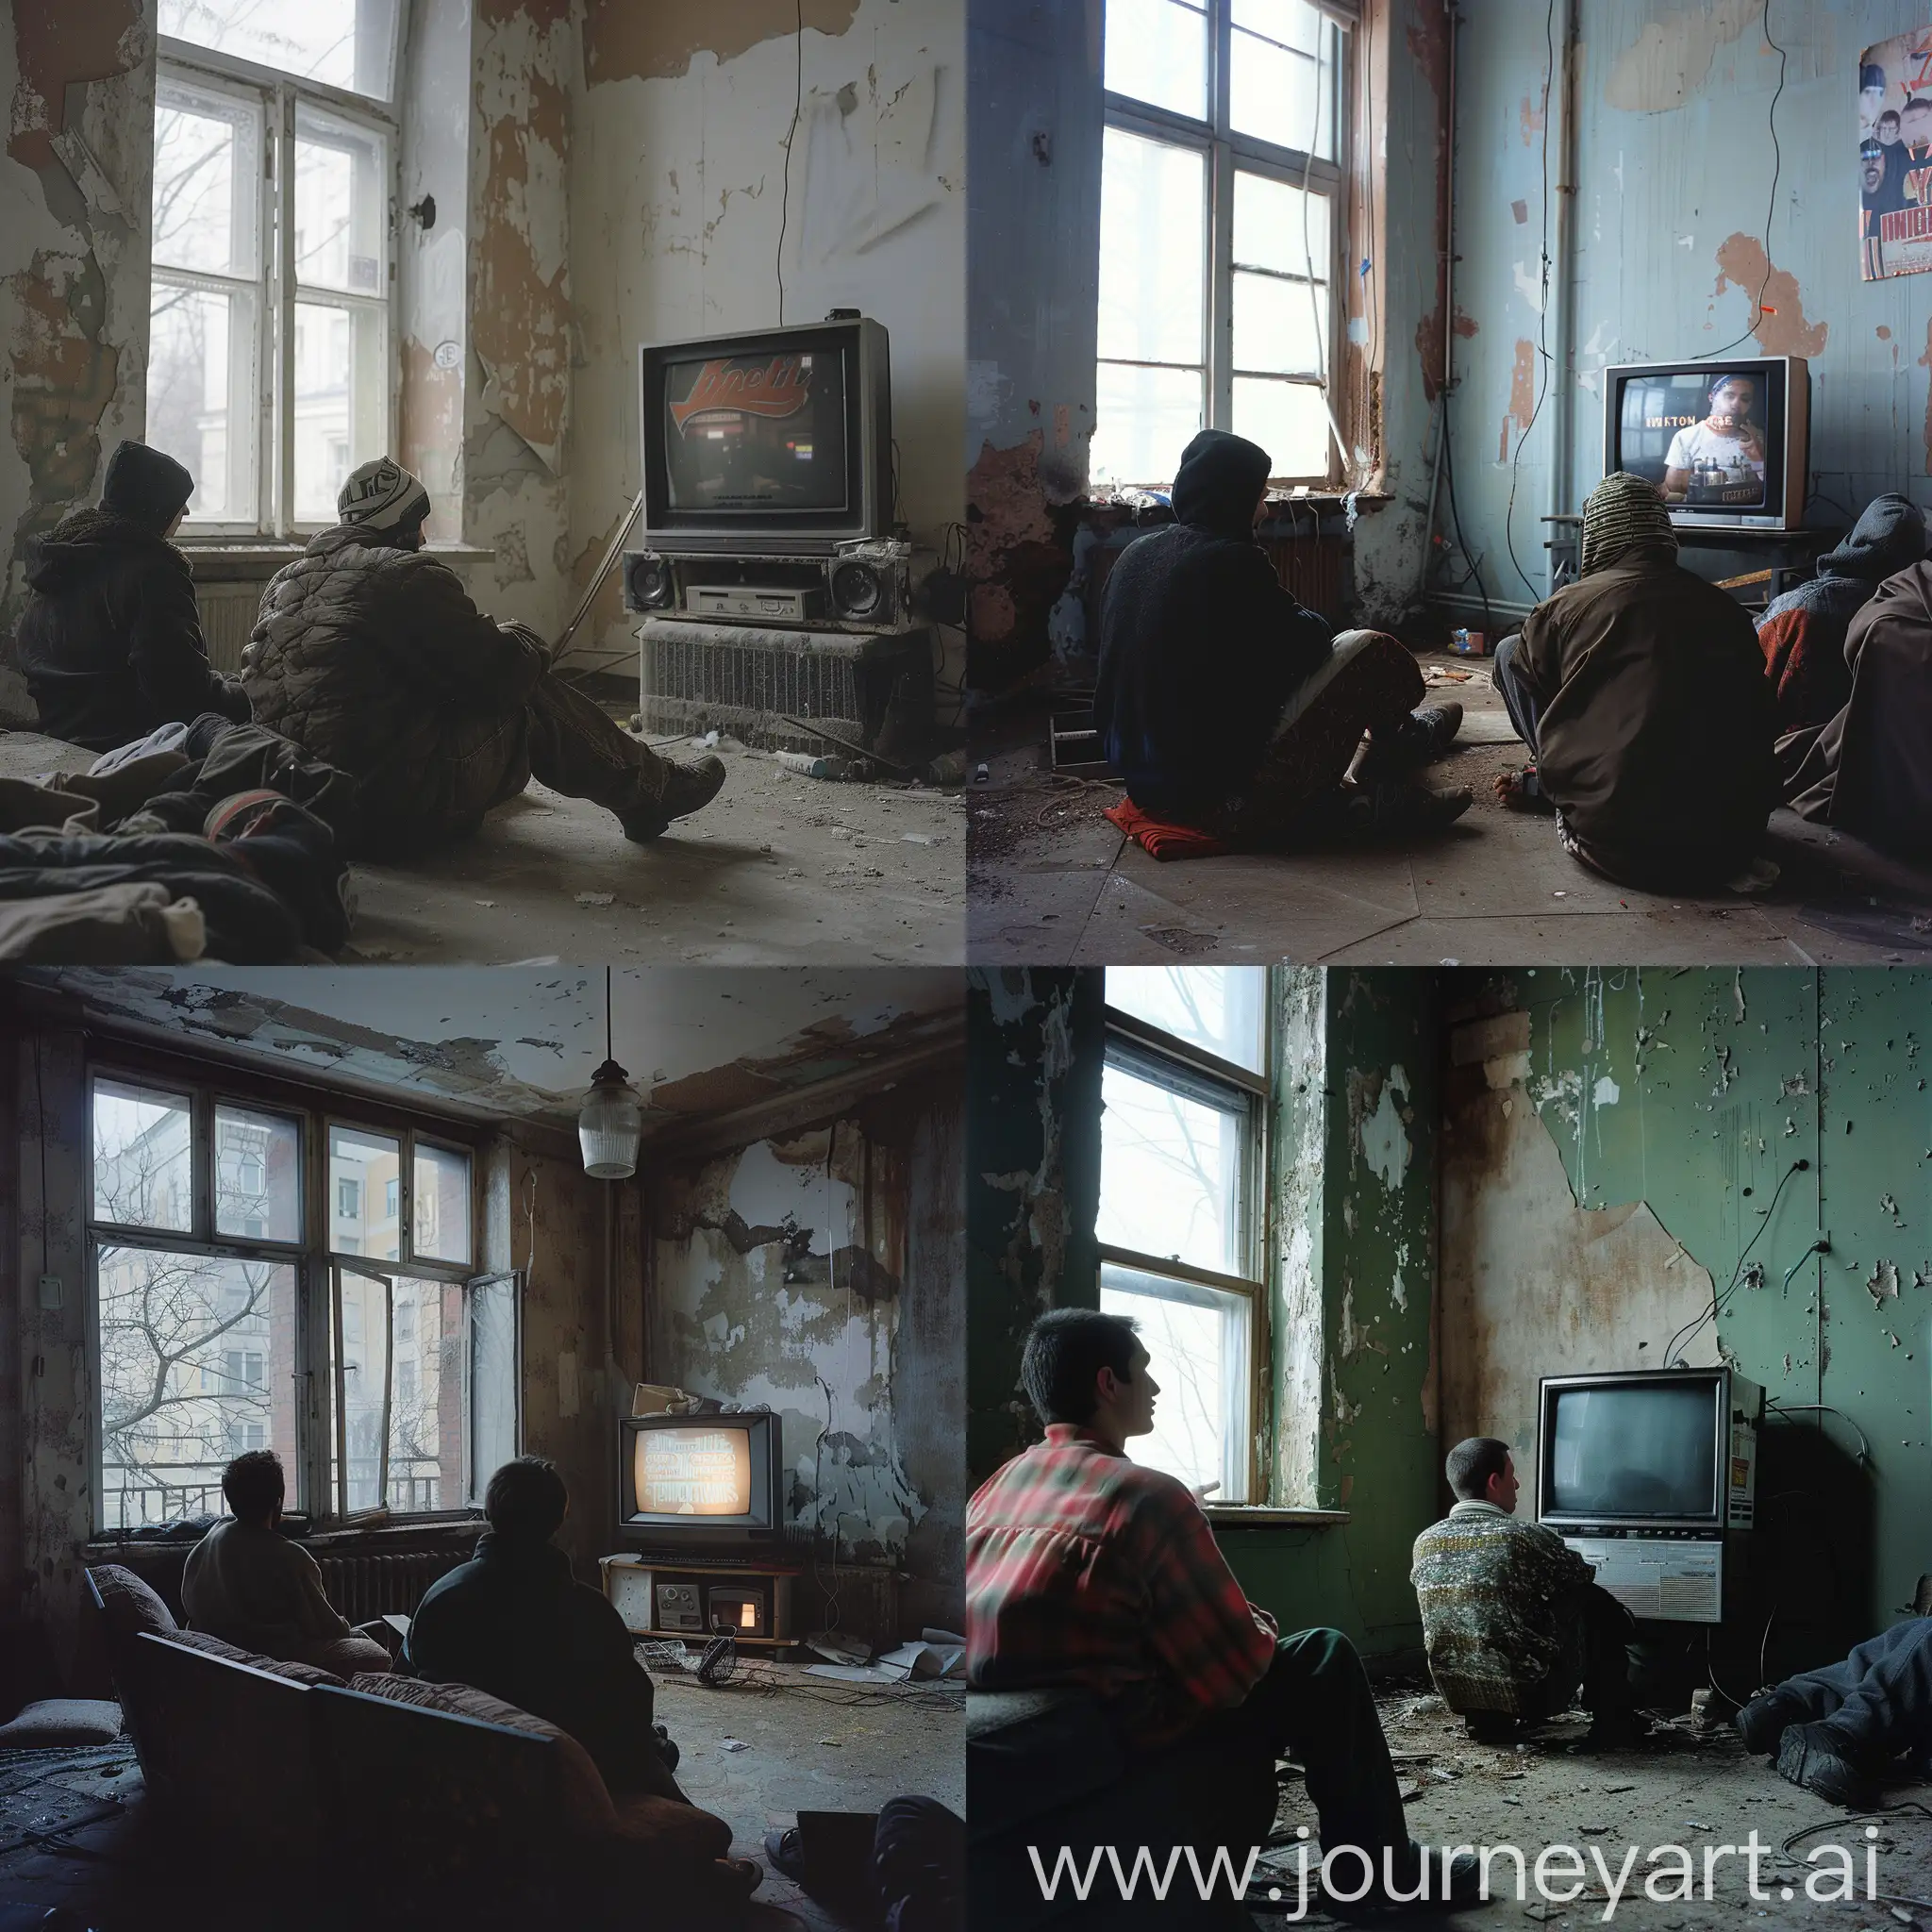 Volunteer-Drug-Addicts-Watching-TV-in-an-Old-Apartment